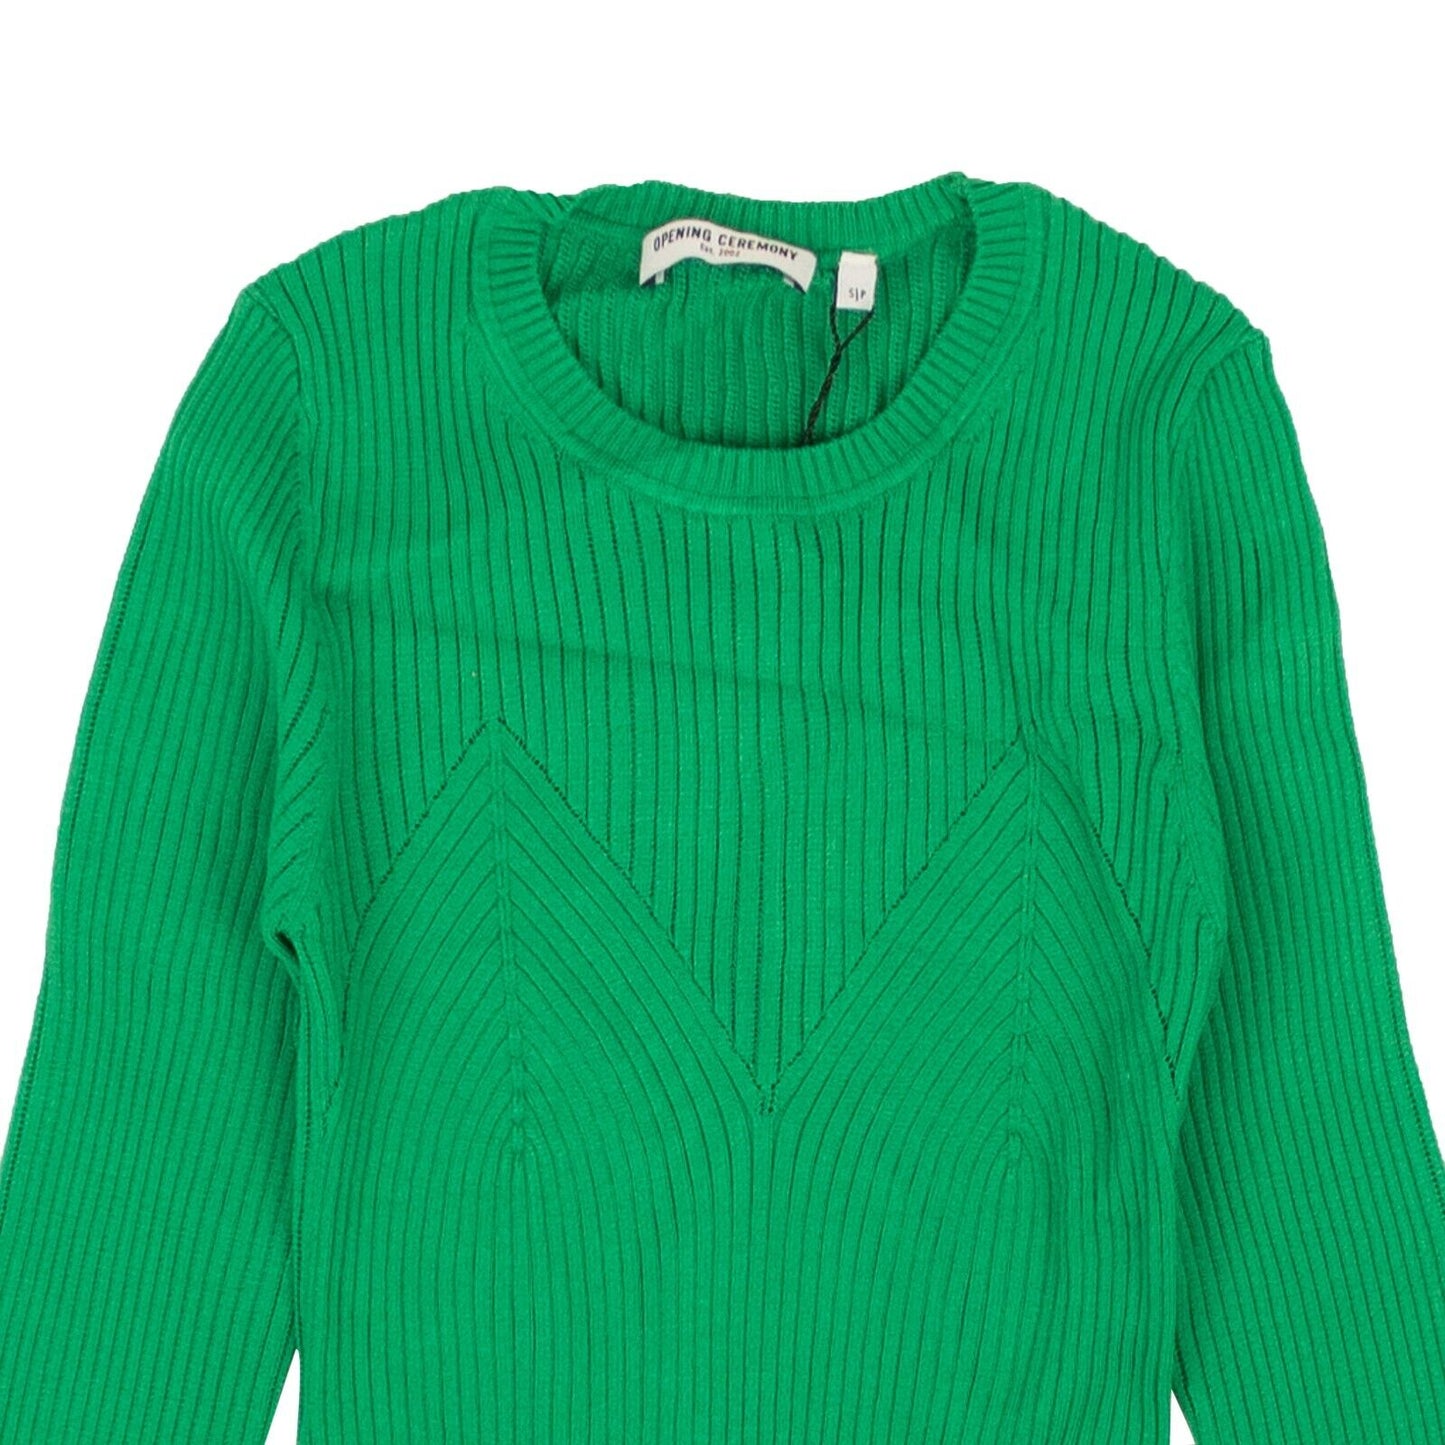 Opening Ceremony Rib Knit Sweater - Green